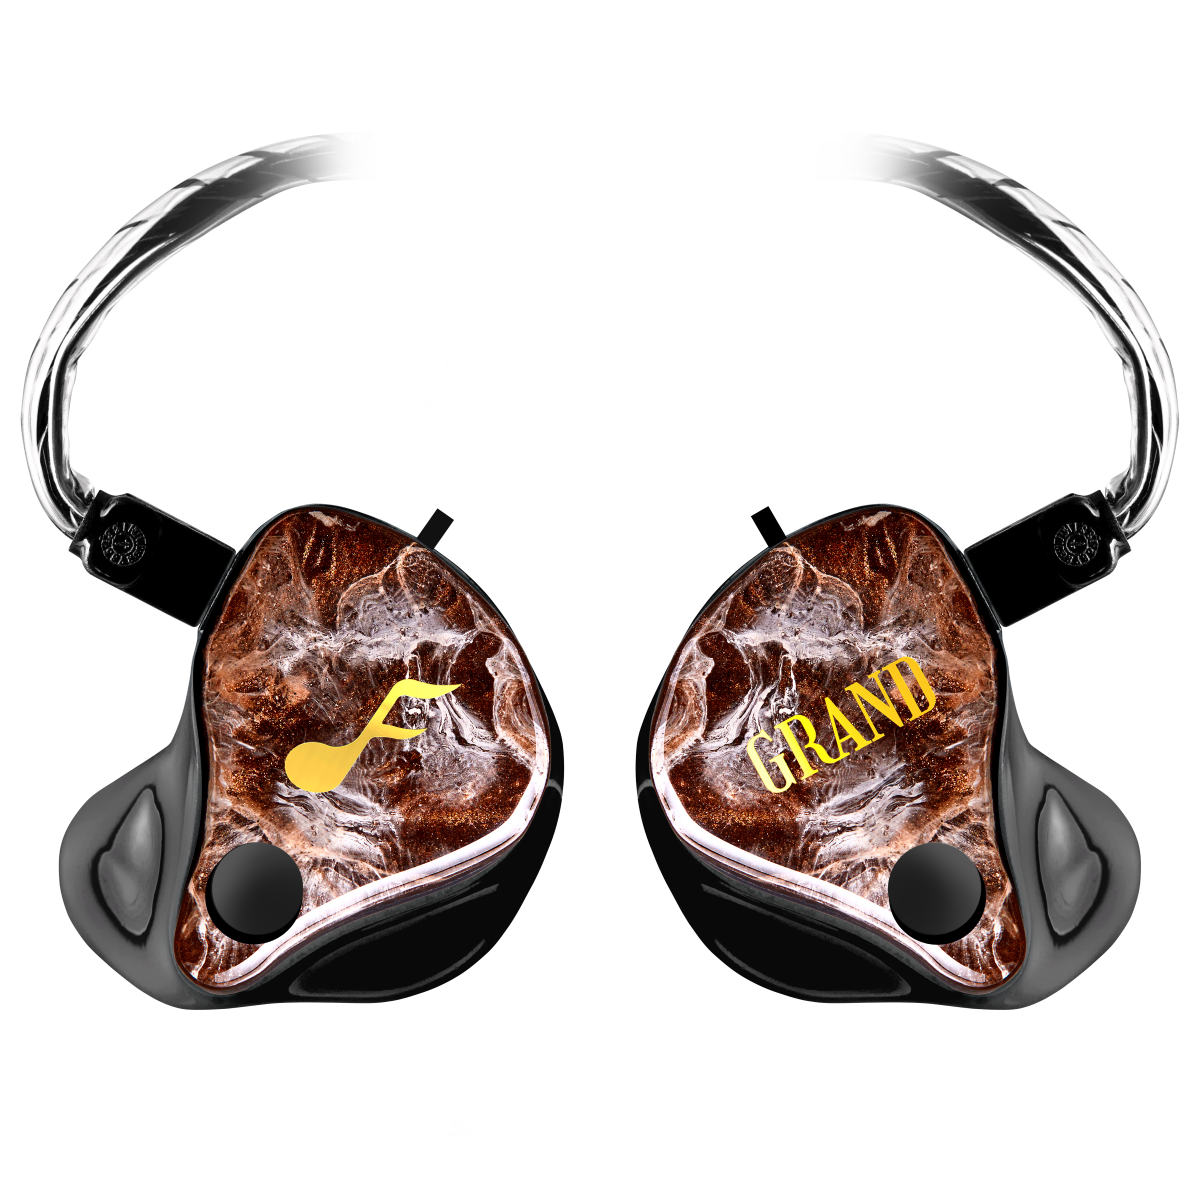 GRAND Maestro Custom IEM - Prices from 4393.00 to 4523.00